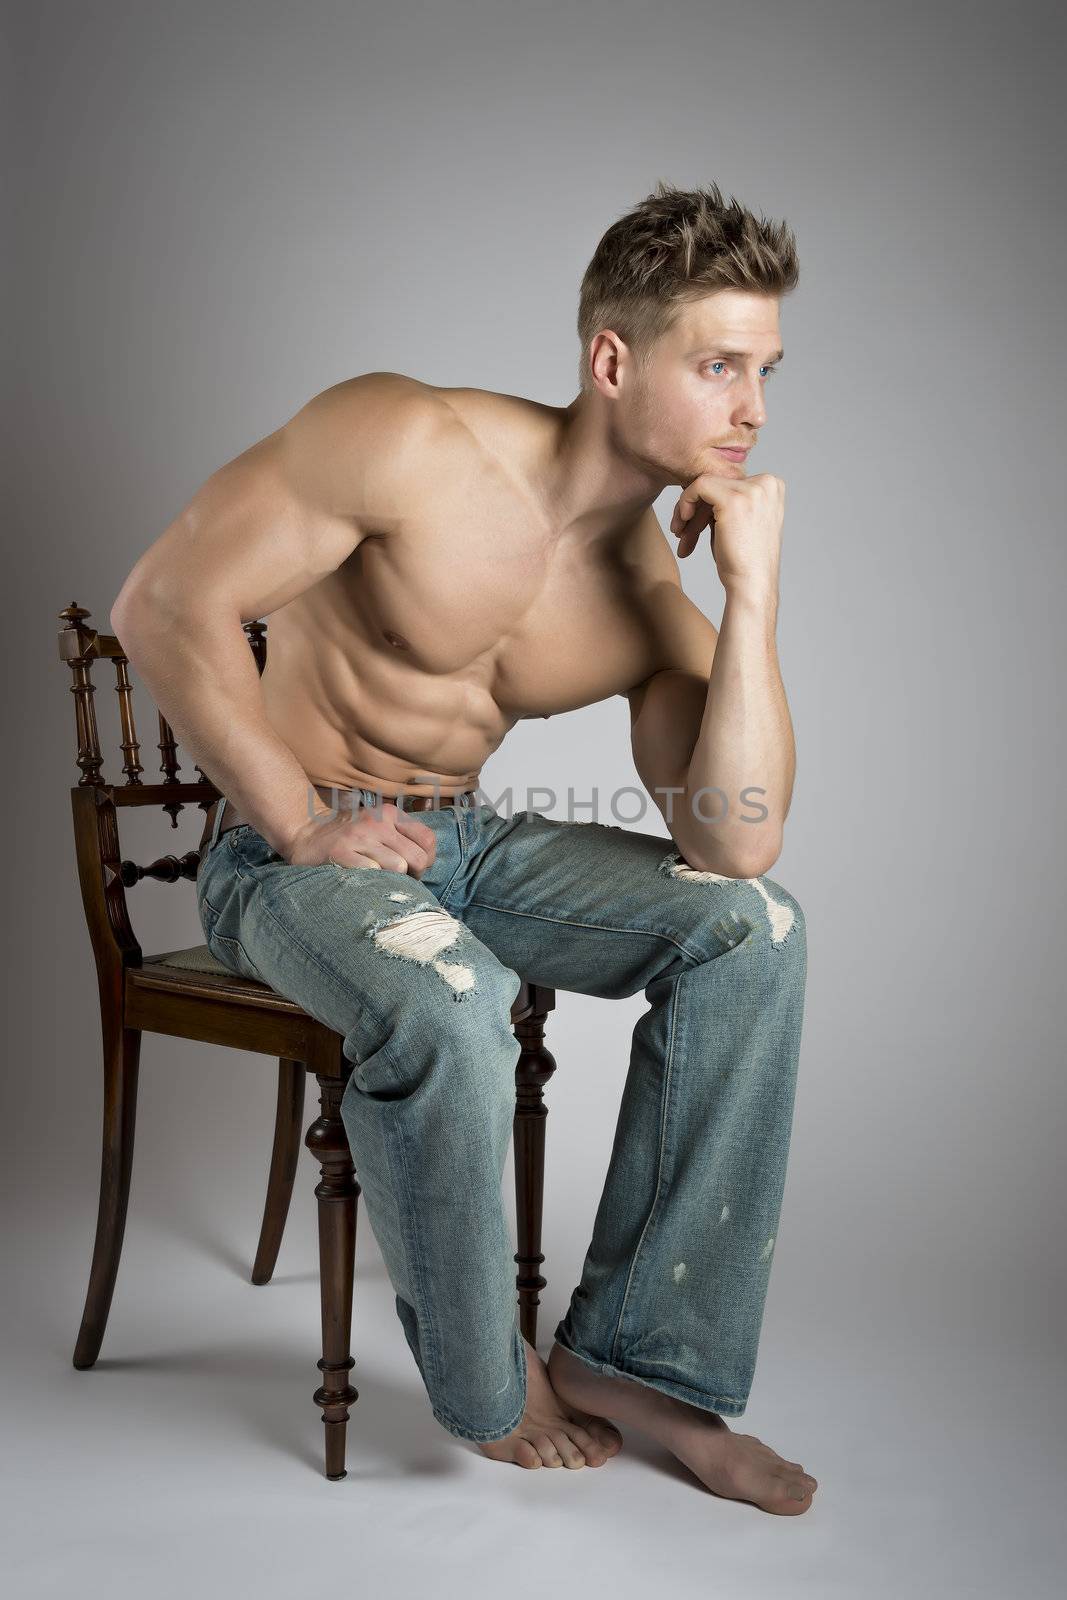 Thinking athlete with well trained muscles sit on a chair